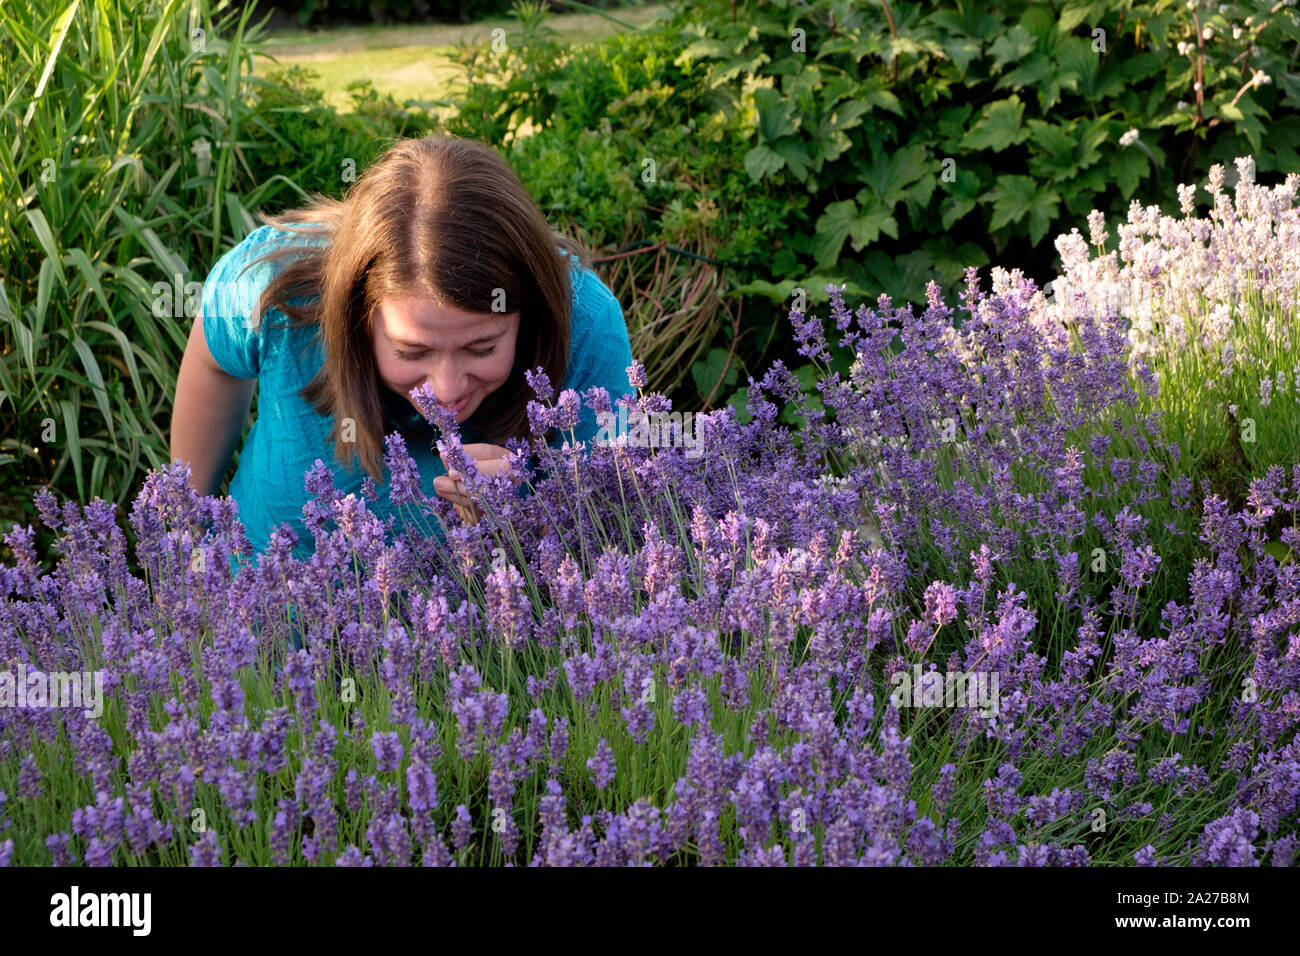 Woman in garden enjoying lavender scent, gardening outdoor as therapy for mental health and wellbeing Stock Photo